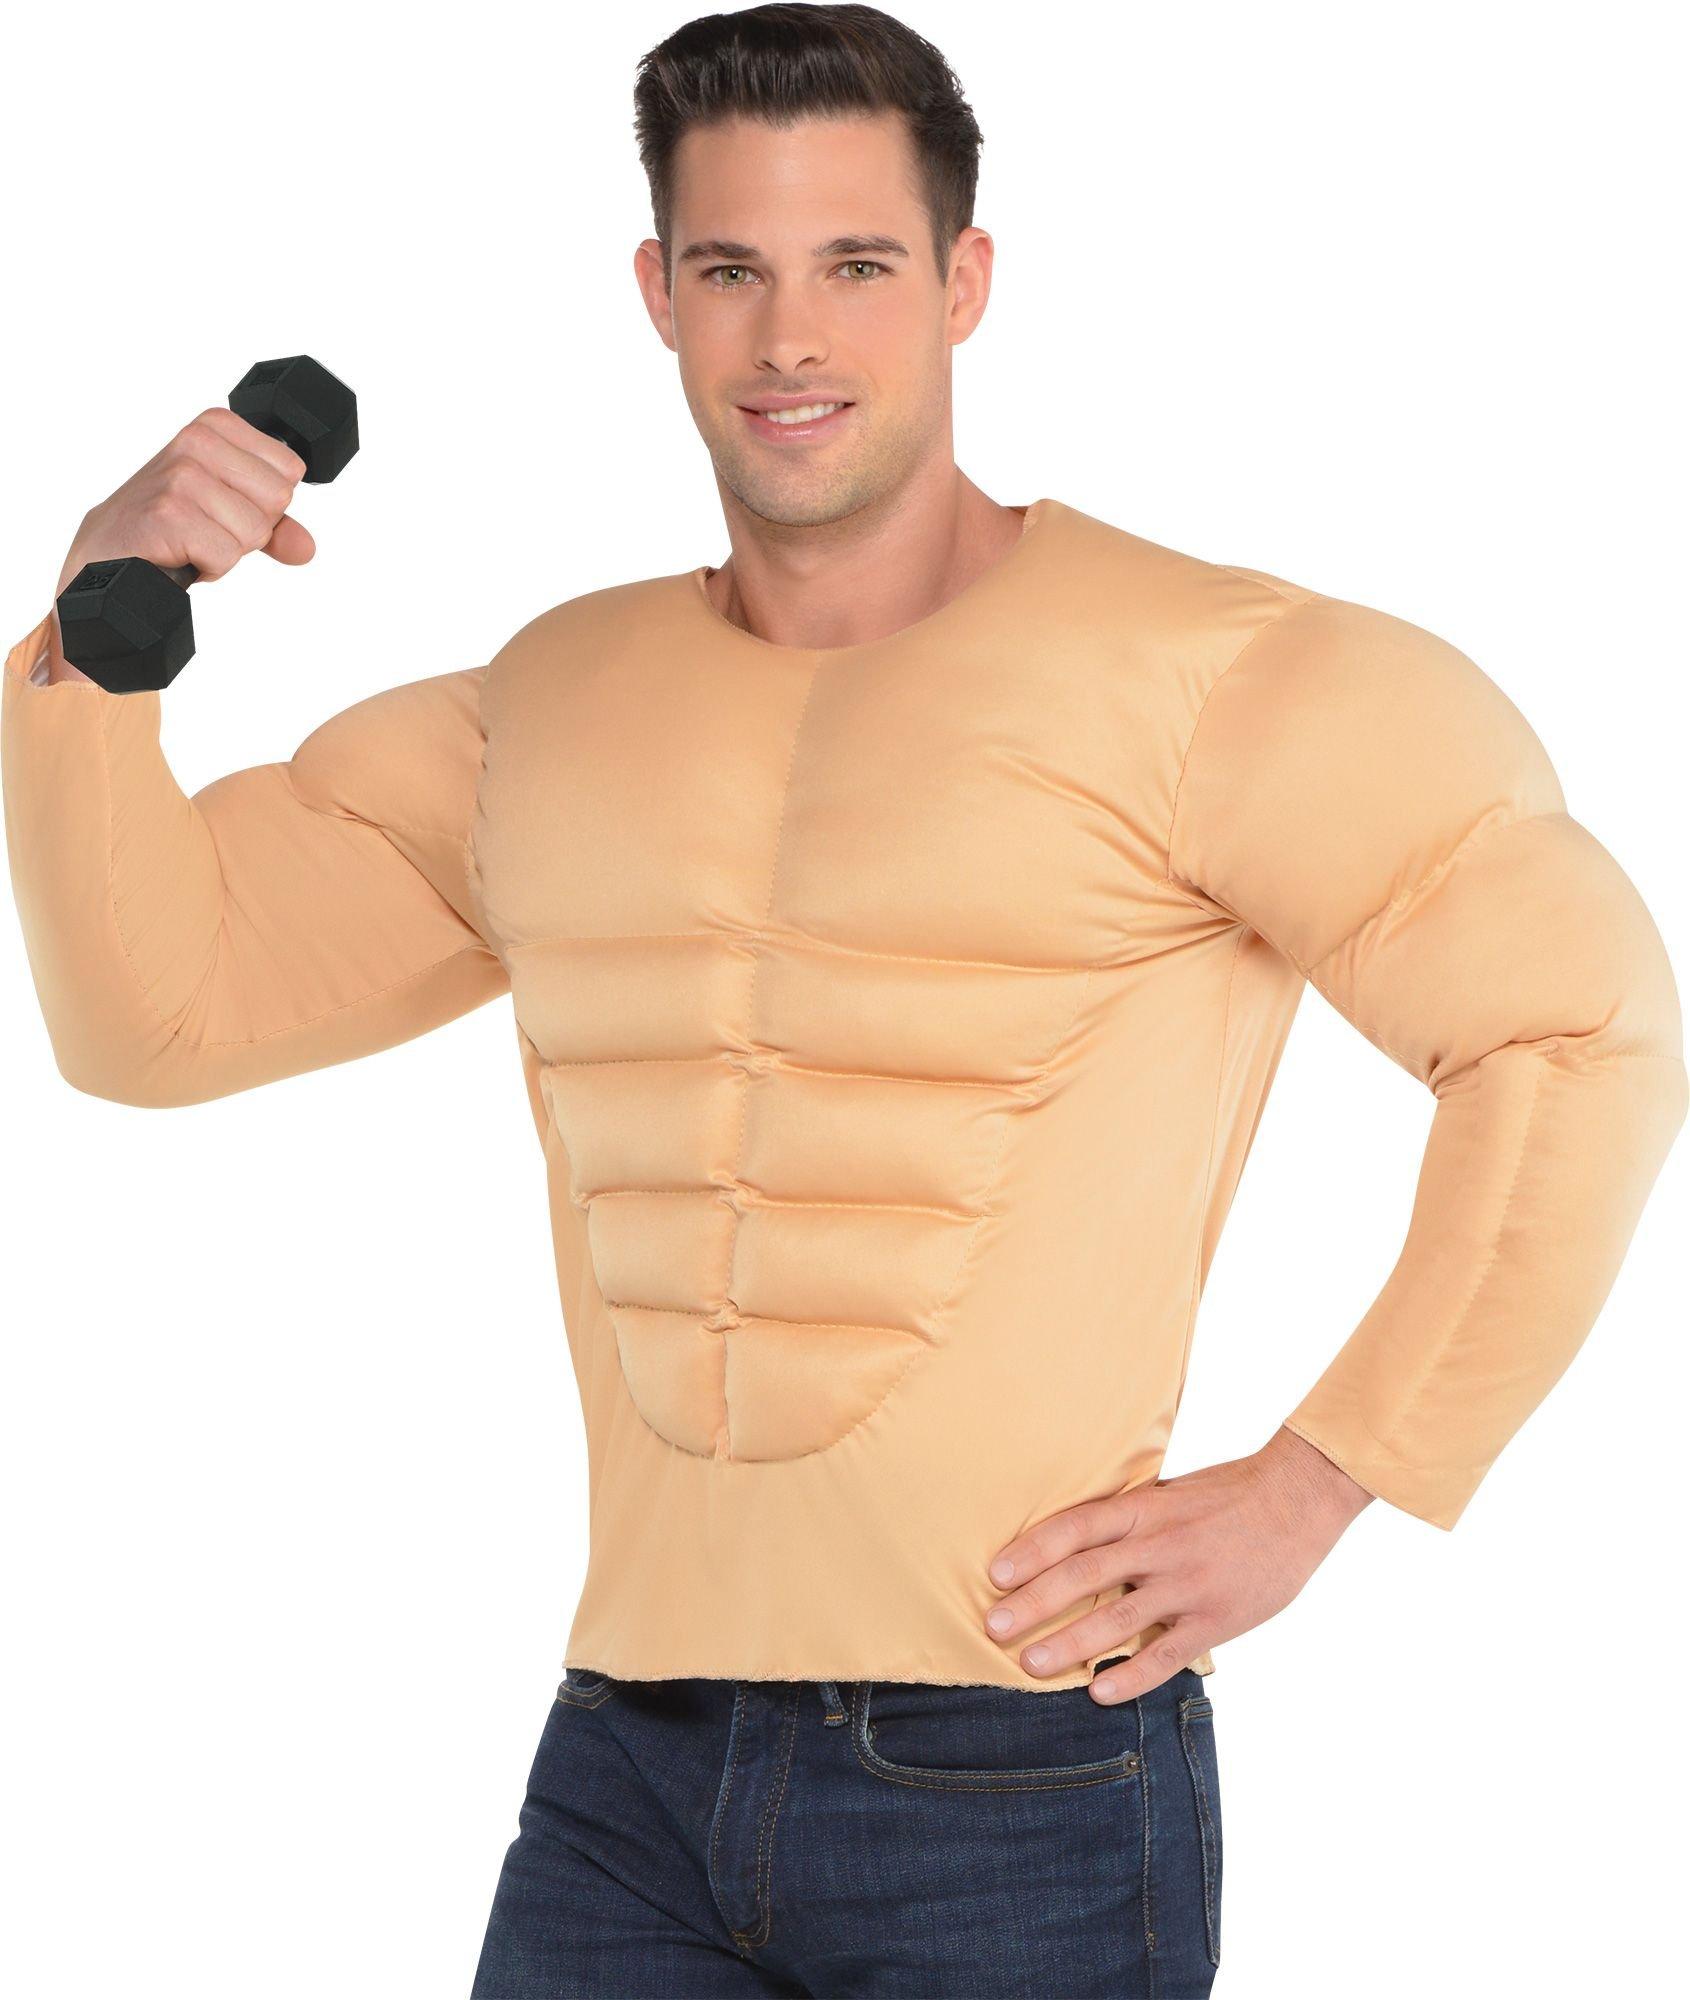 Mens 3d T-shirt Bodybuilding Simulated Muscle Shirt Nude Skin